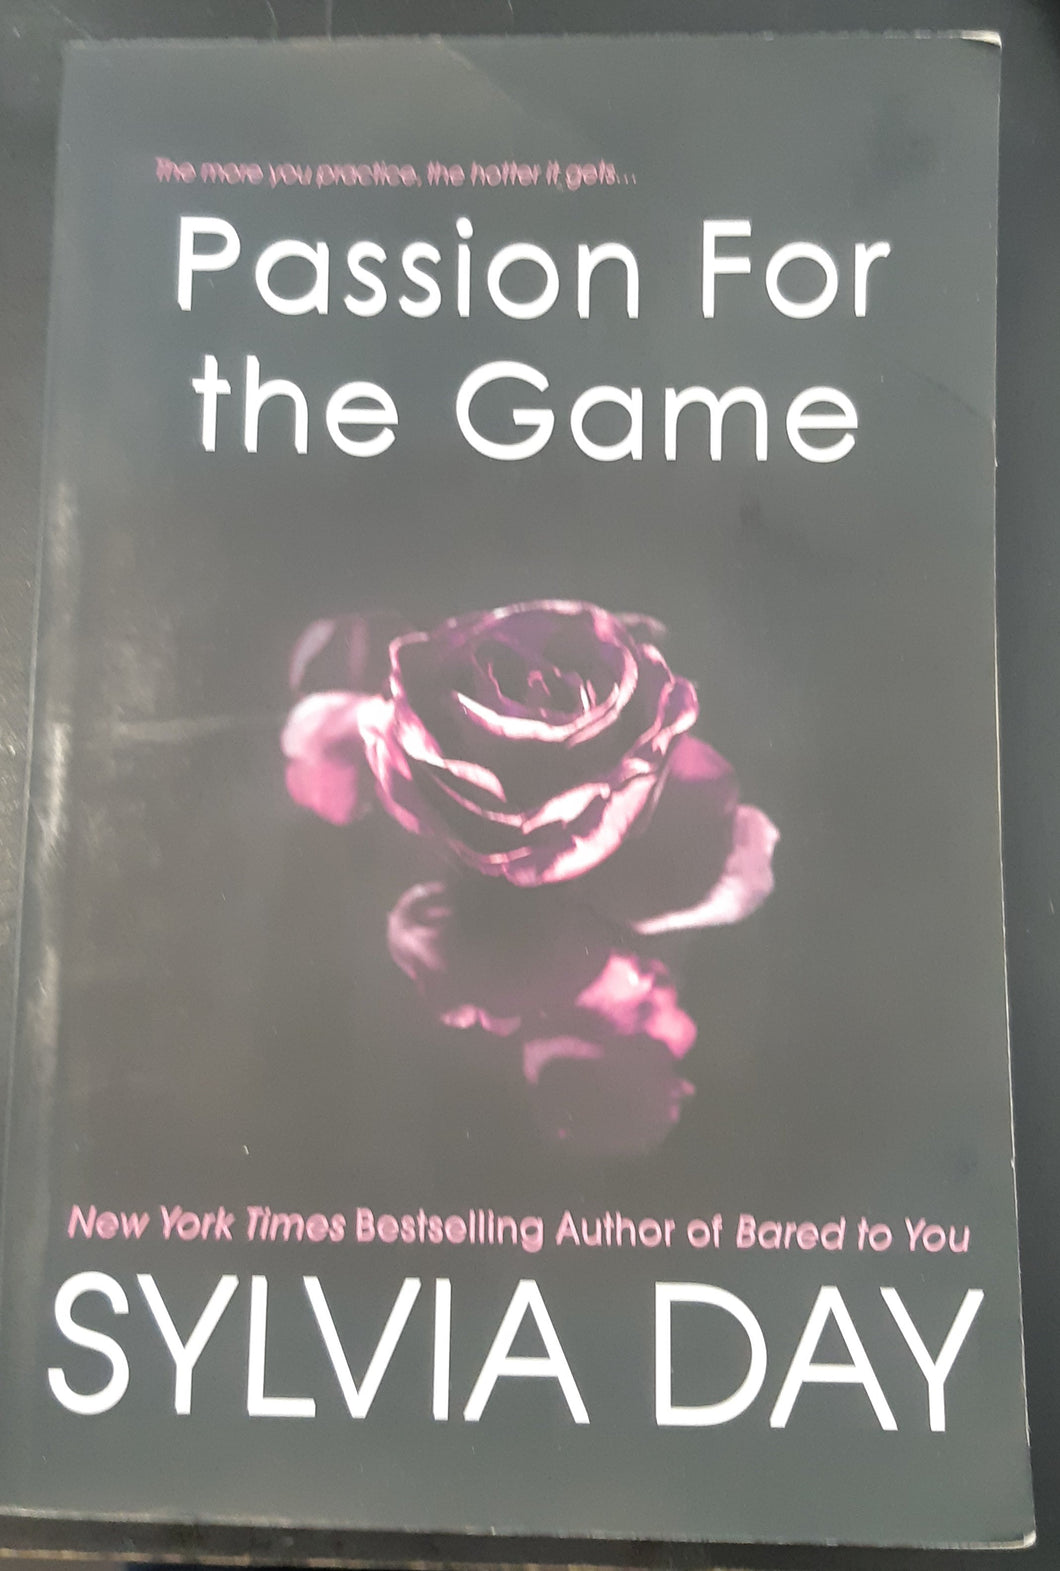 Passion For the Game by Sylvia Day